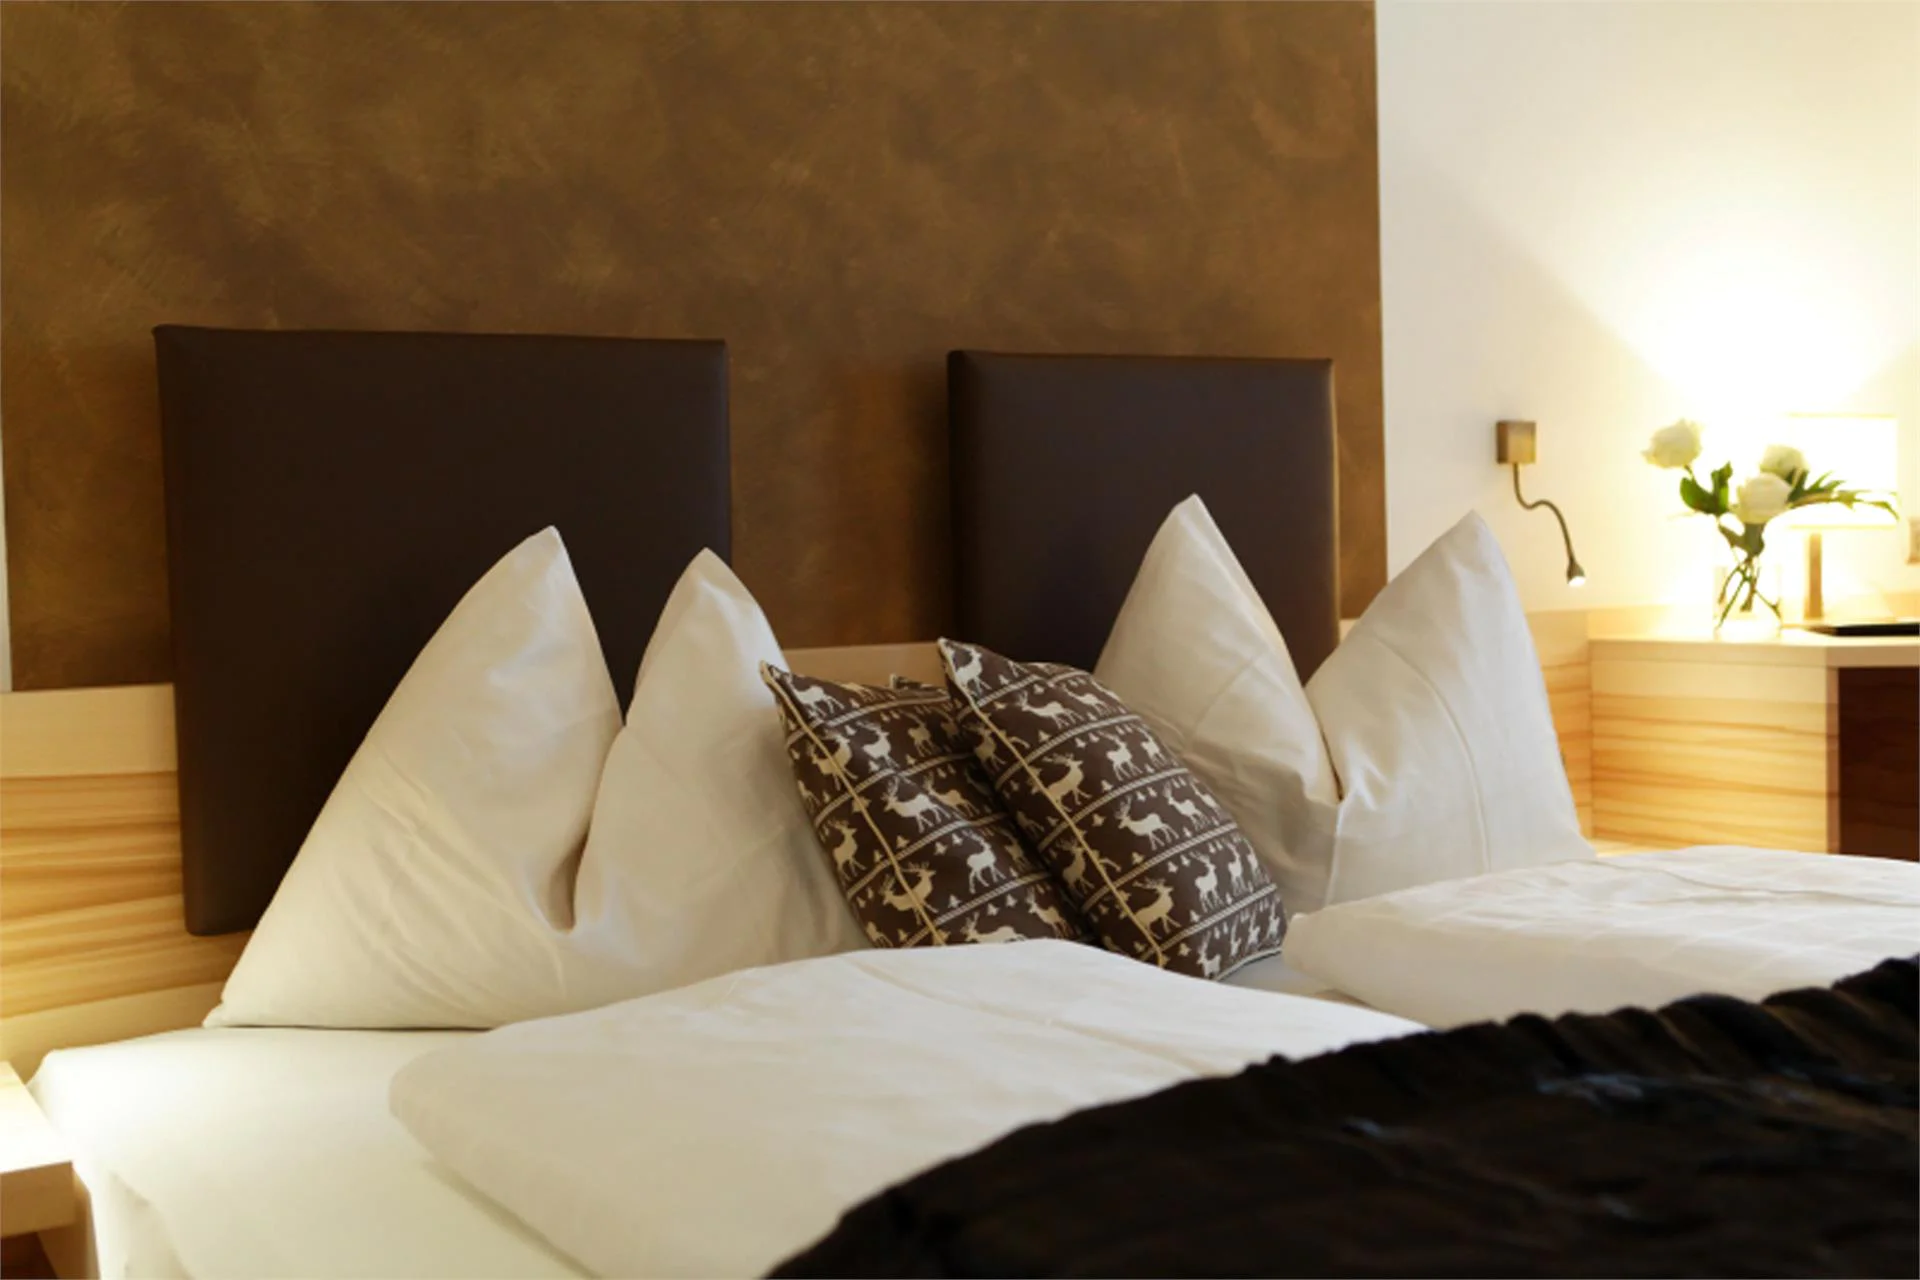 Residence Hotel Alpinum Sand in Taufers/Campo Tures 32 suedtirol.info